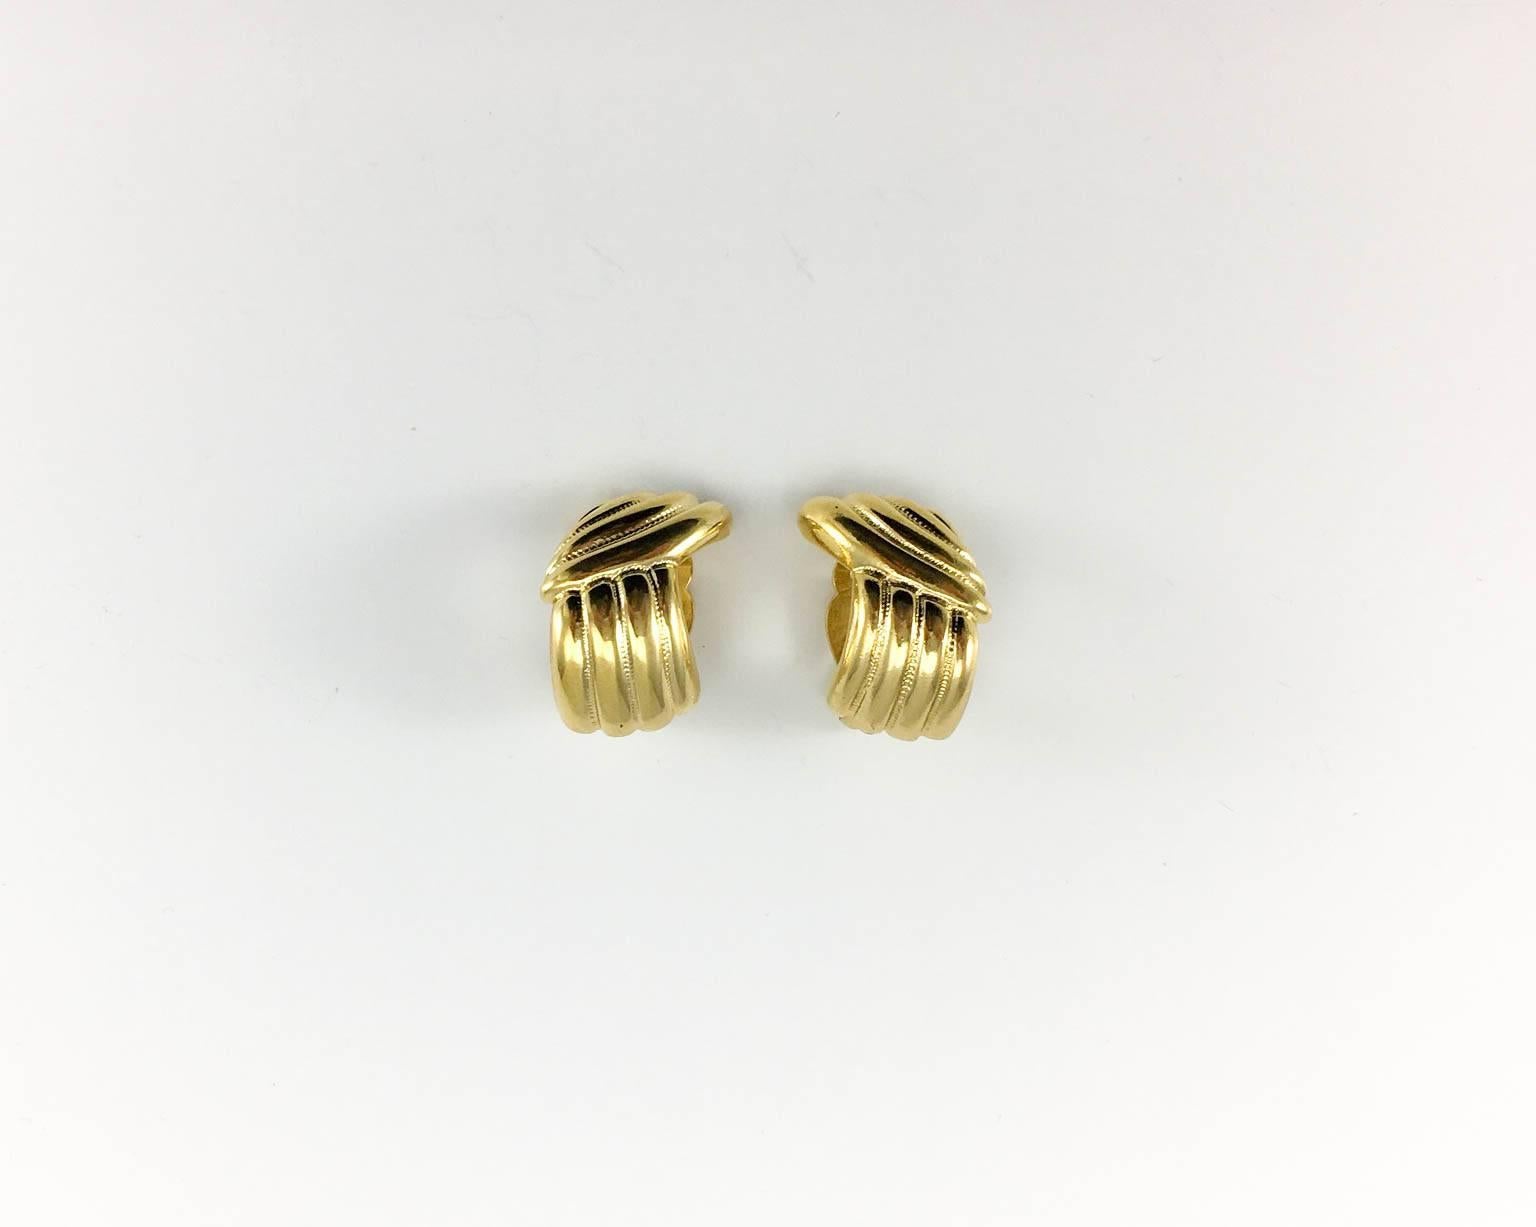 Yves Saint Laurent Undulating Gilt Earrings - 1980's In Excellent Condition In London, Chelsea